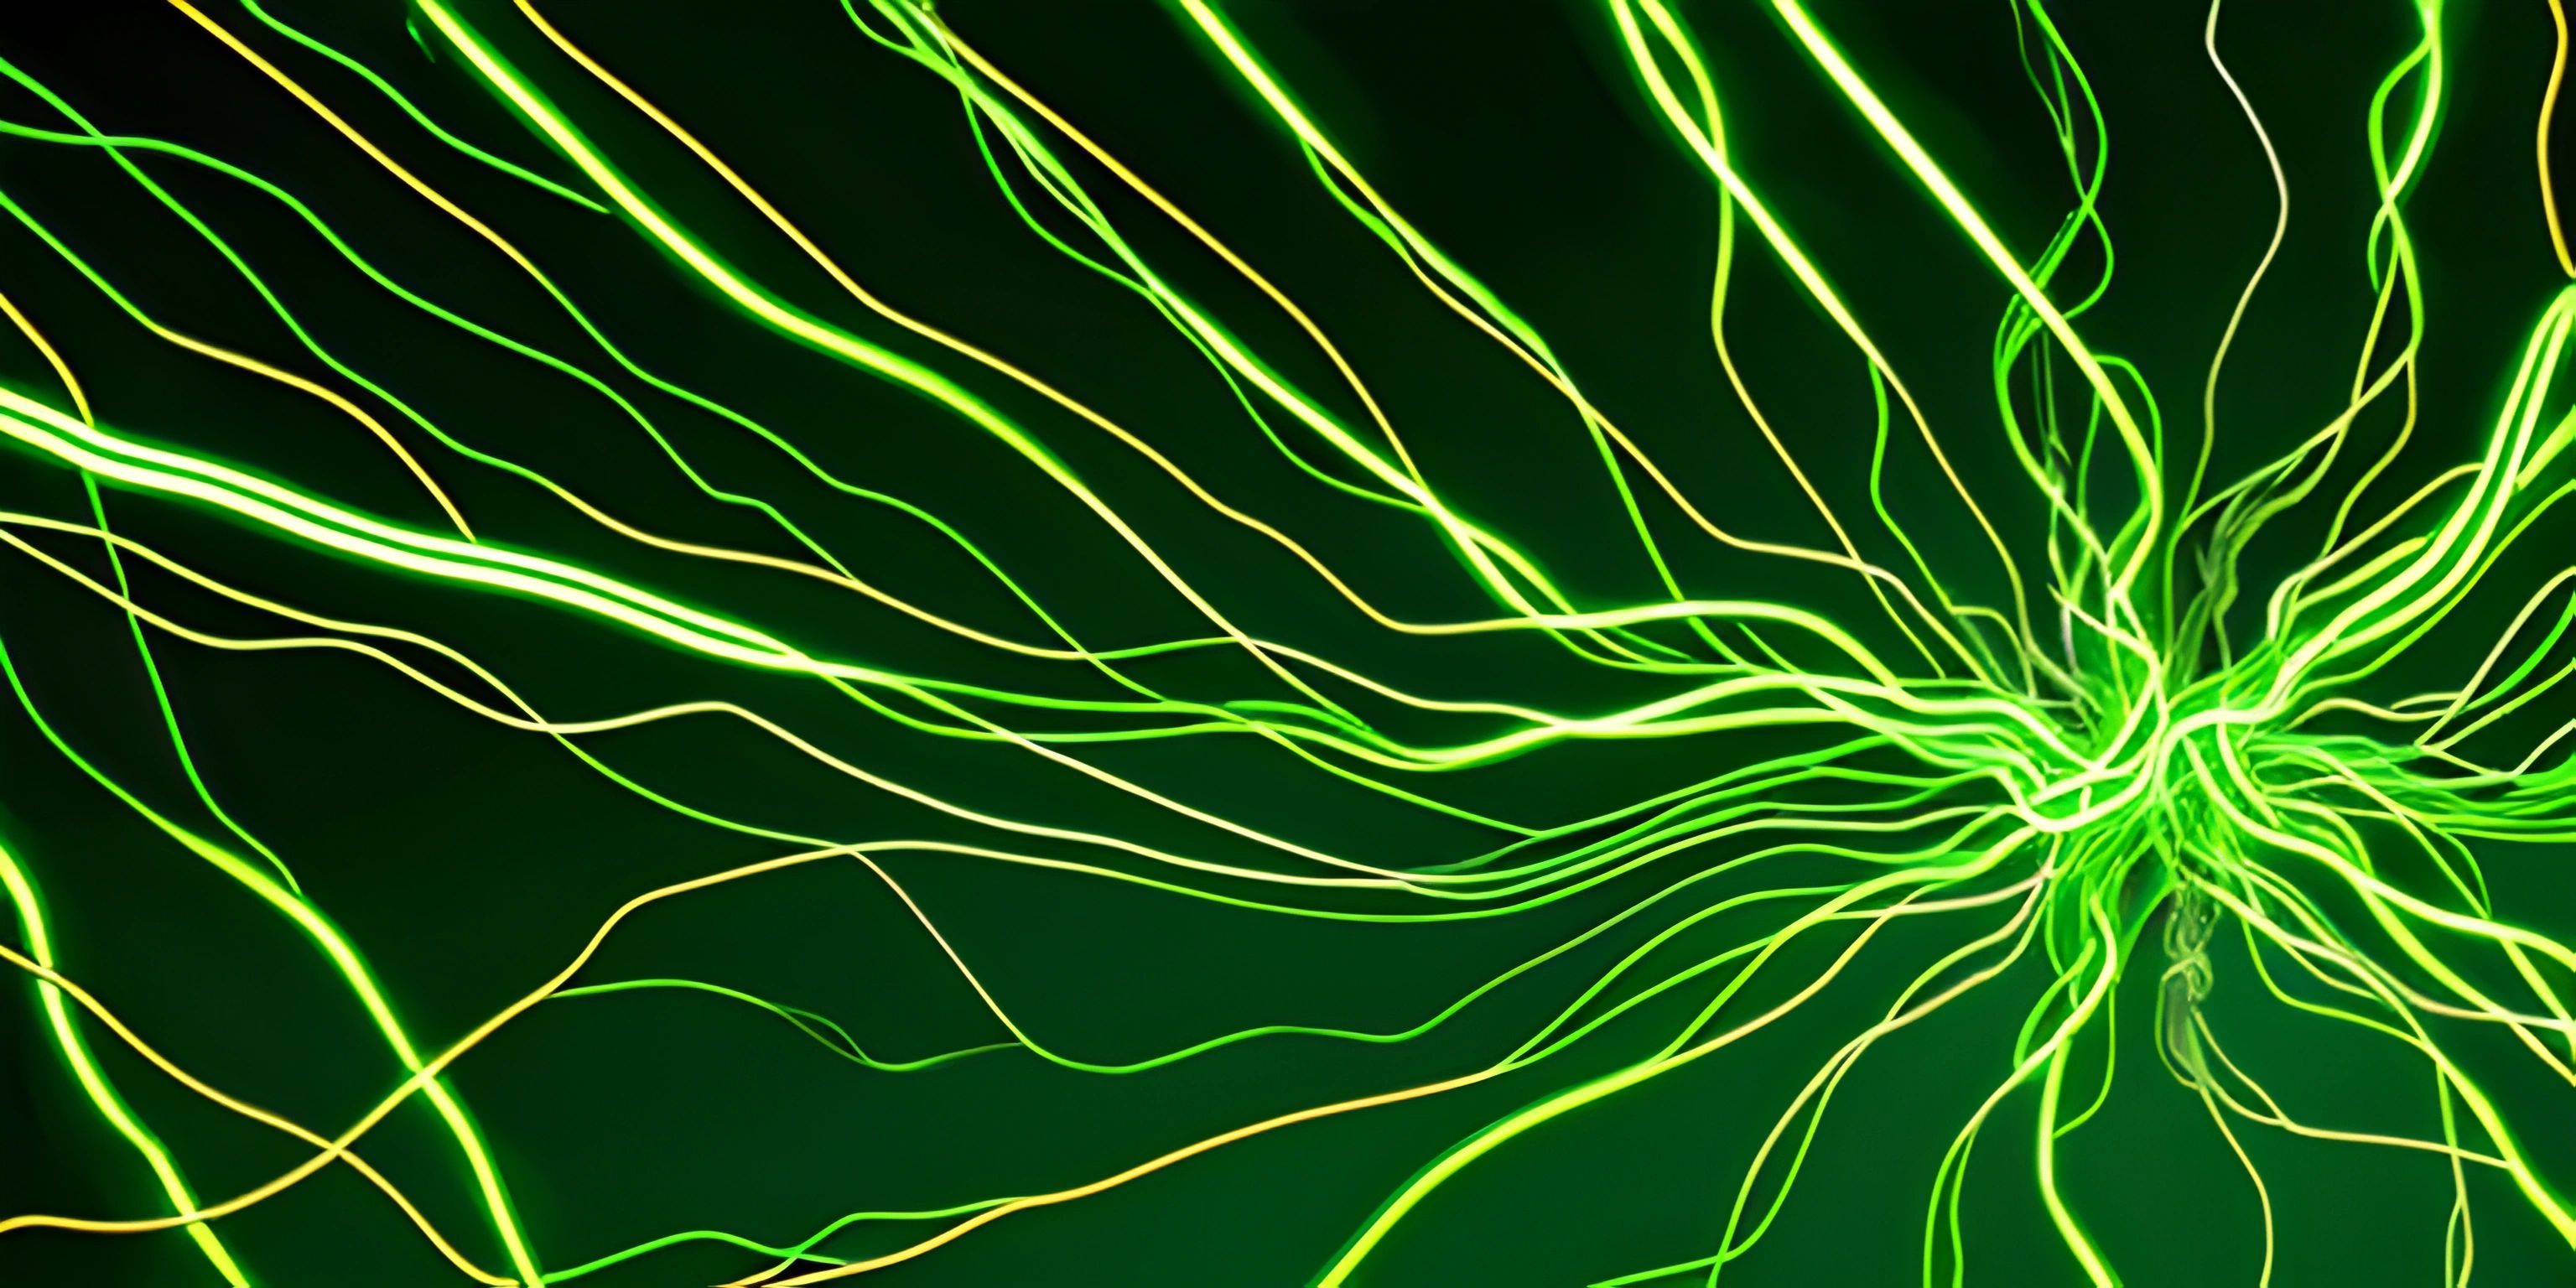 an illuminated image of a plant with its branches glowing green, green and yellow as well